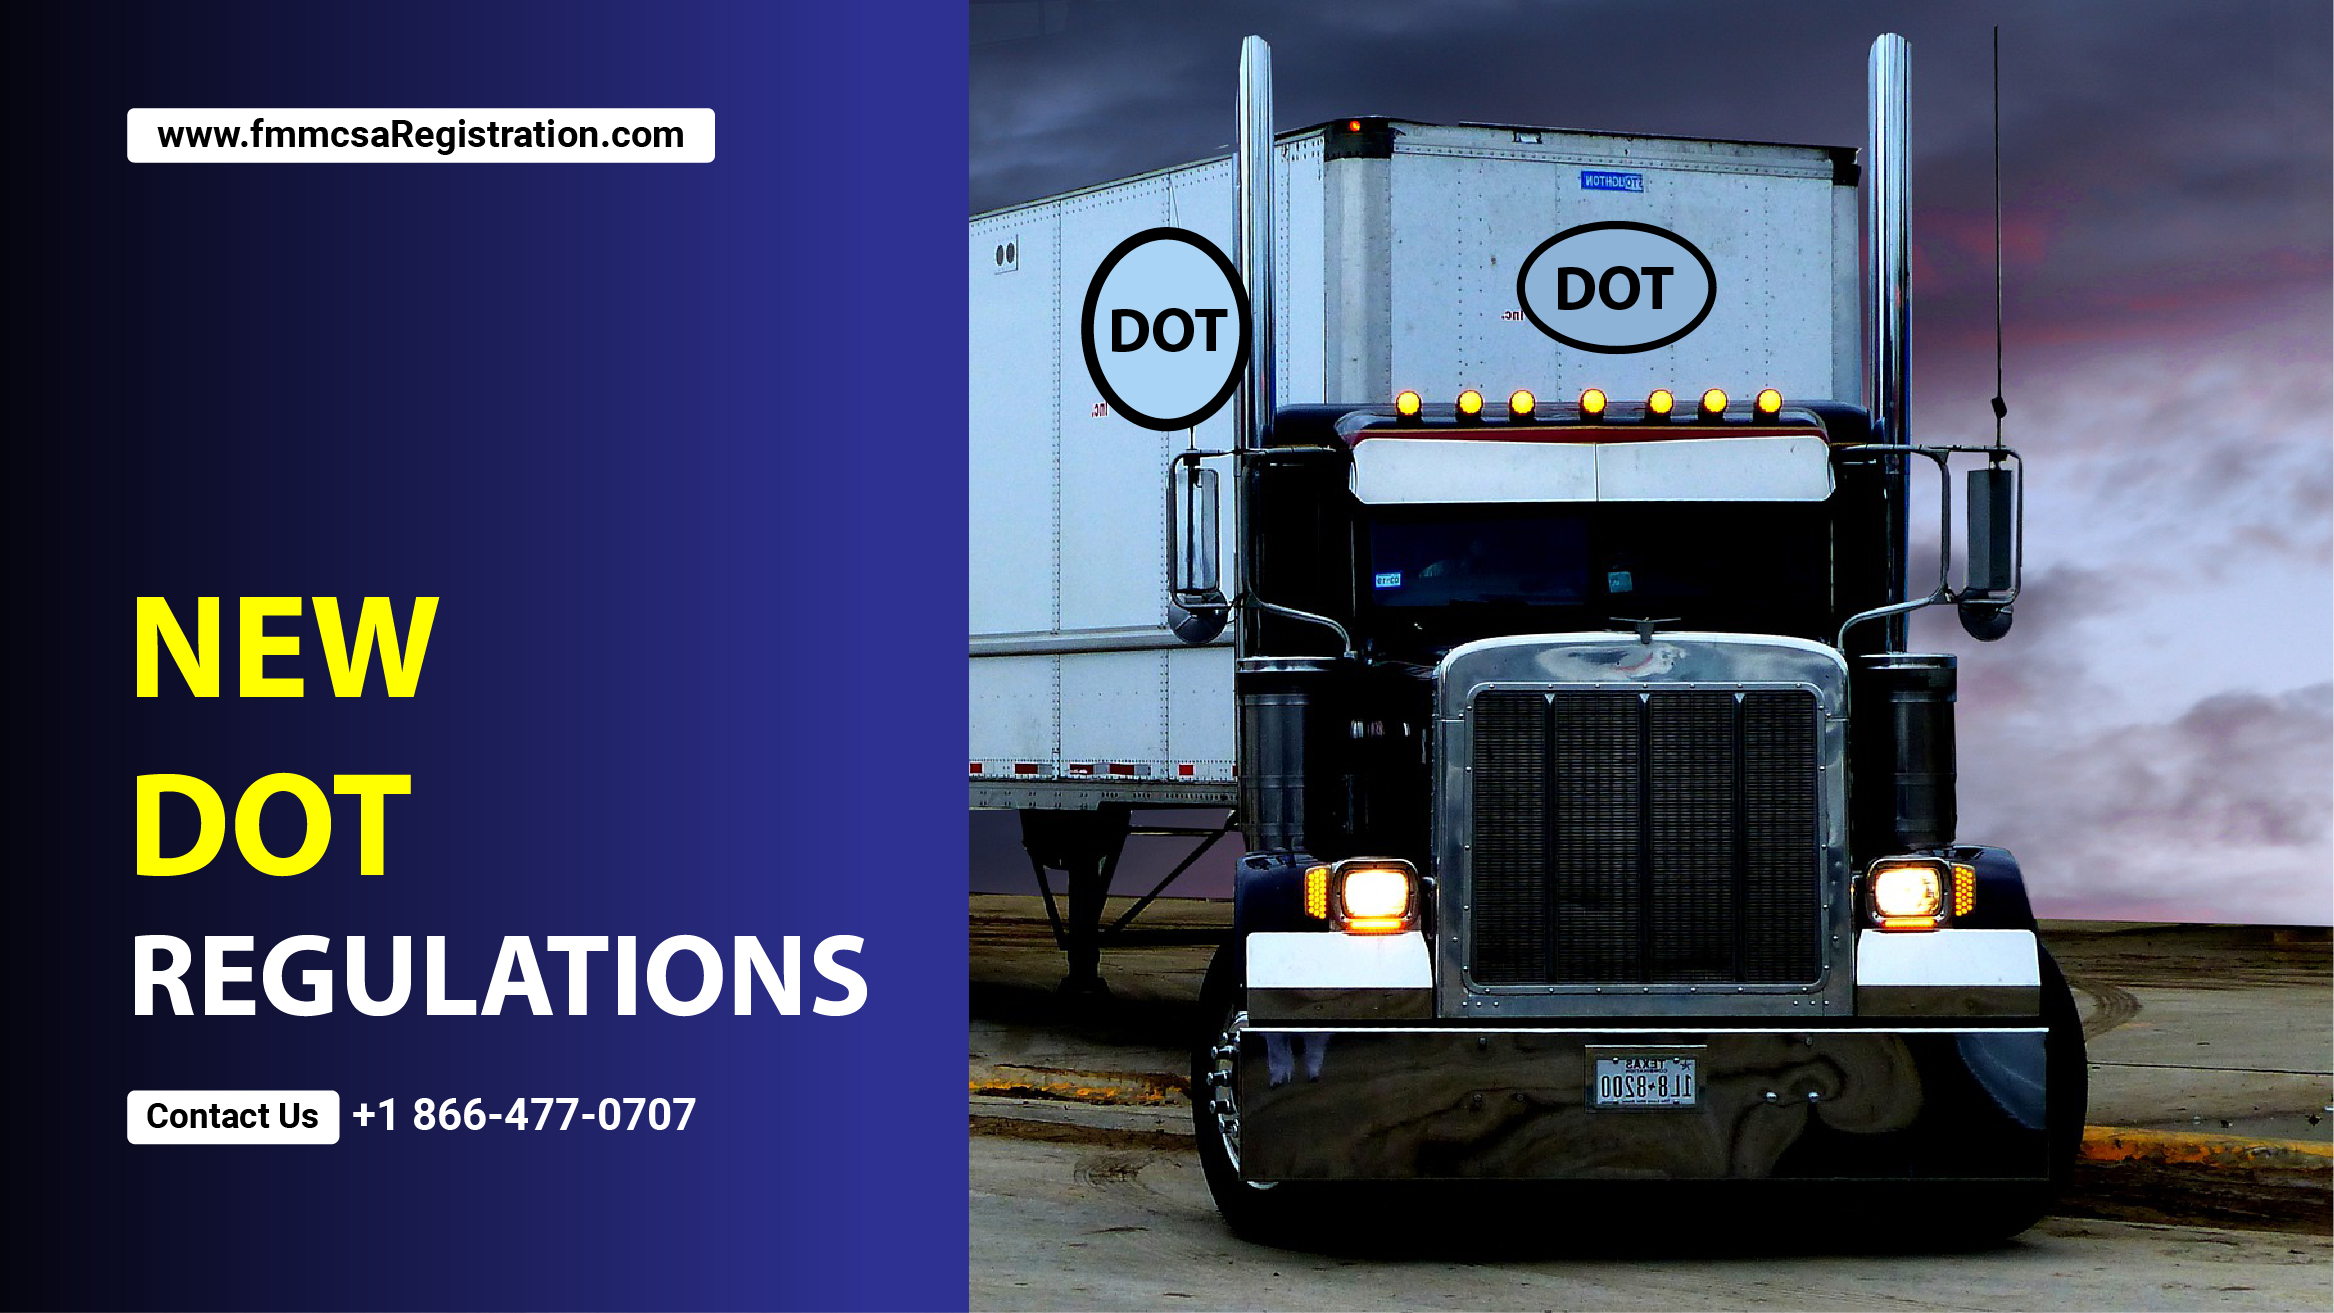 Inform yourself on new DOT regulations in trucking 